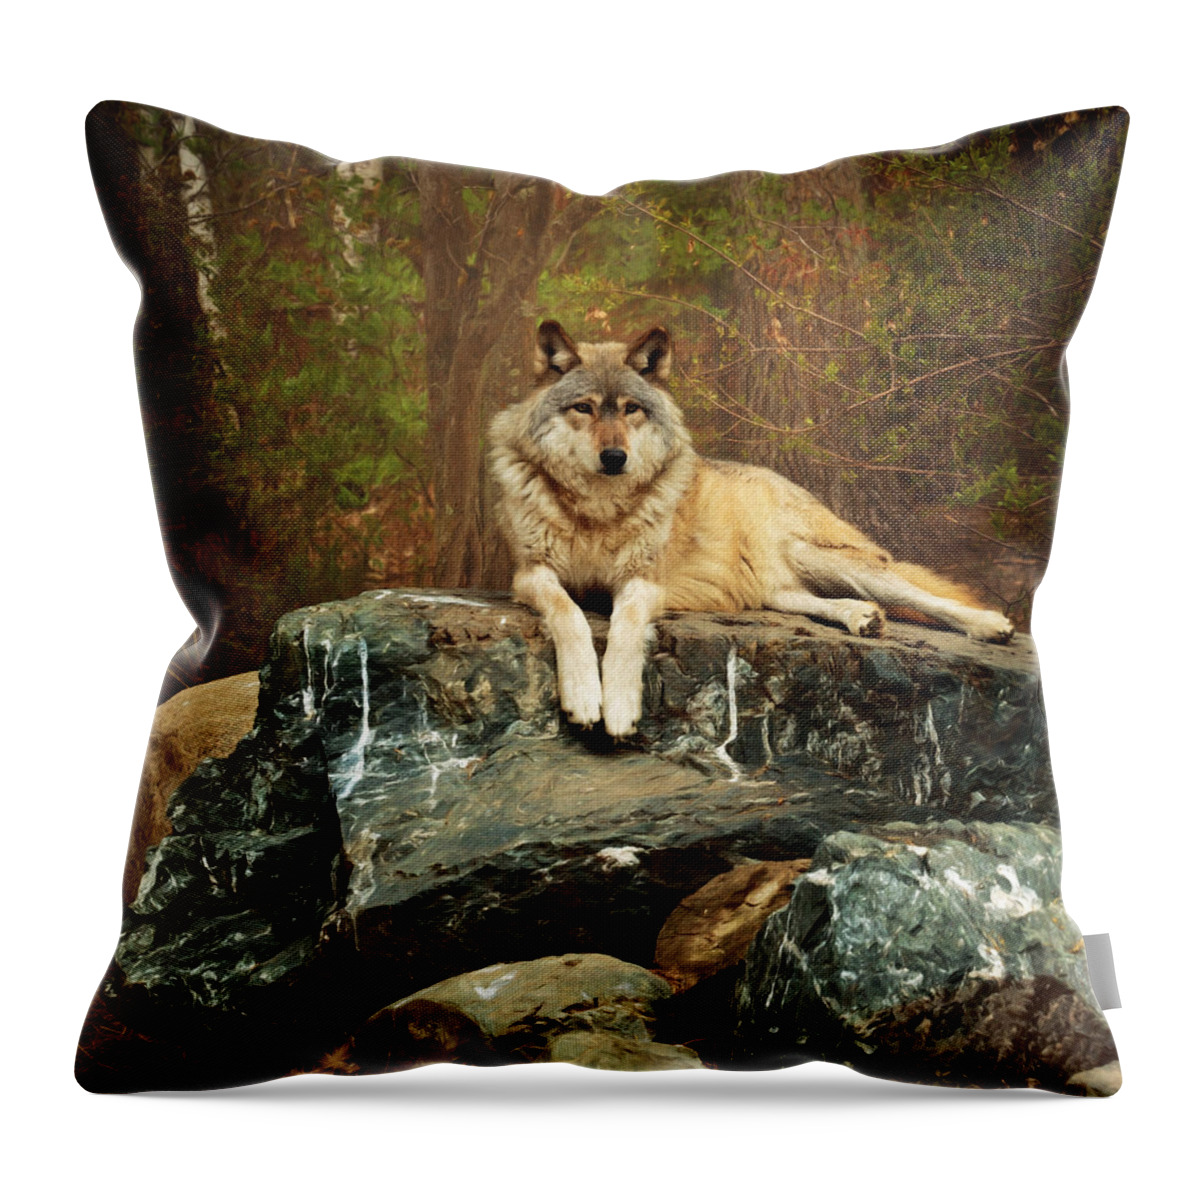 Animal Throw Pillow featuring the photograph Just Chilling by Susan Rissi Tregoning